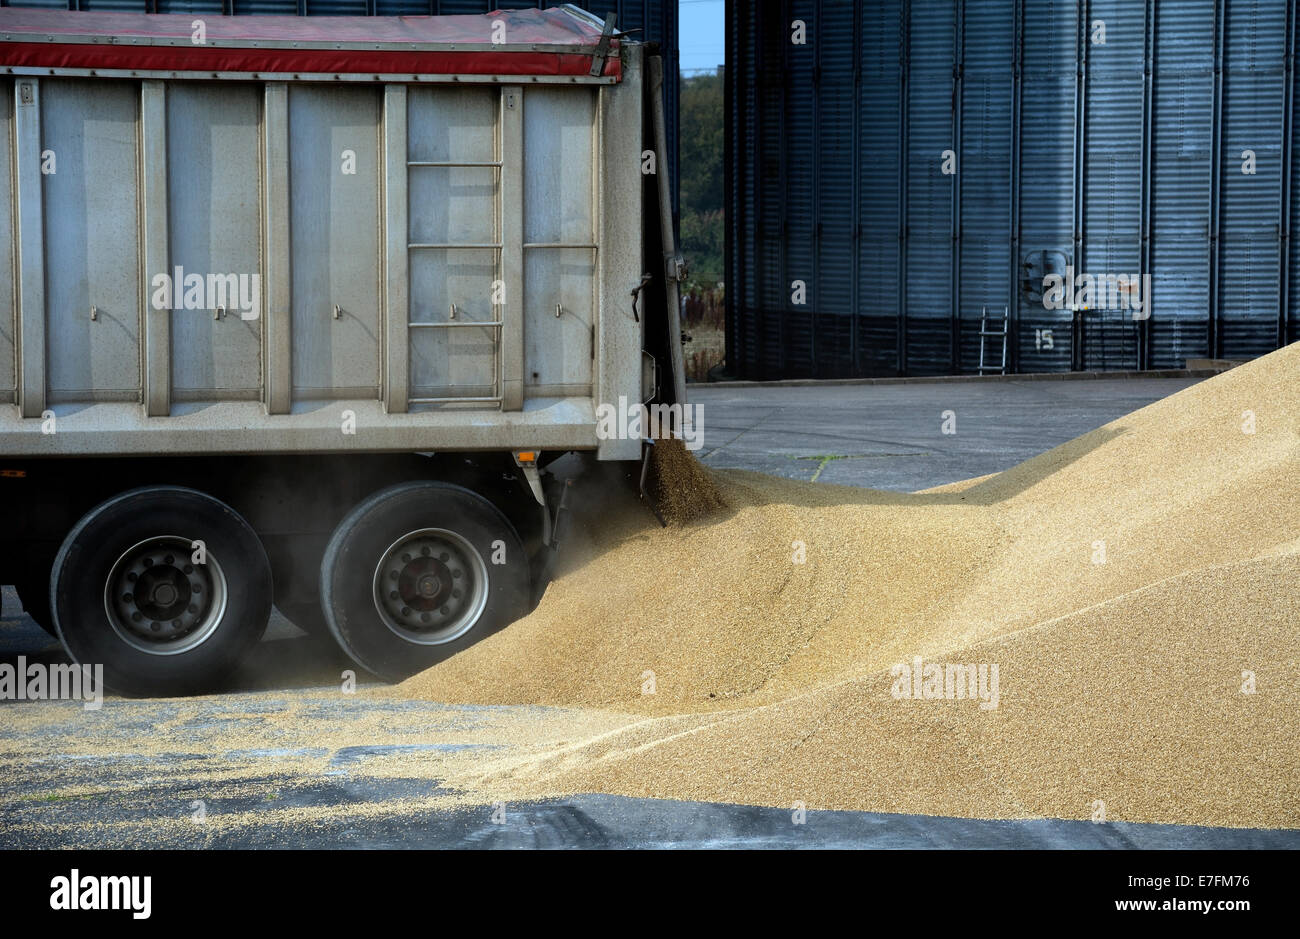 A massive tipper truck delivers grain for storage and processing, It is dumped outside until it can be moved into the silos. Stock Photo